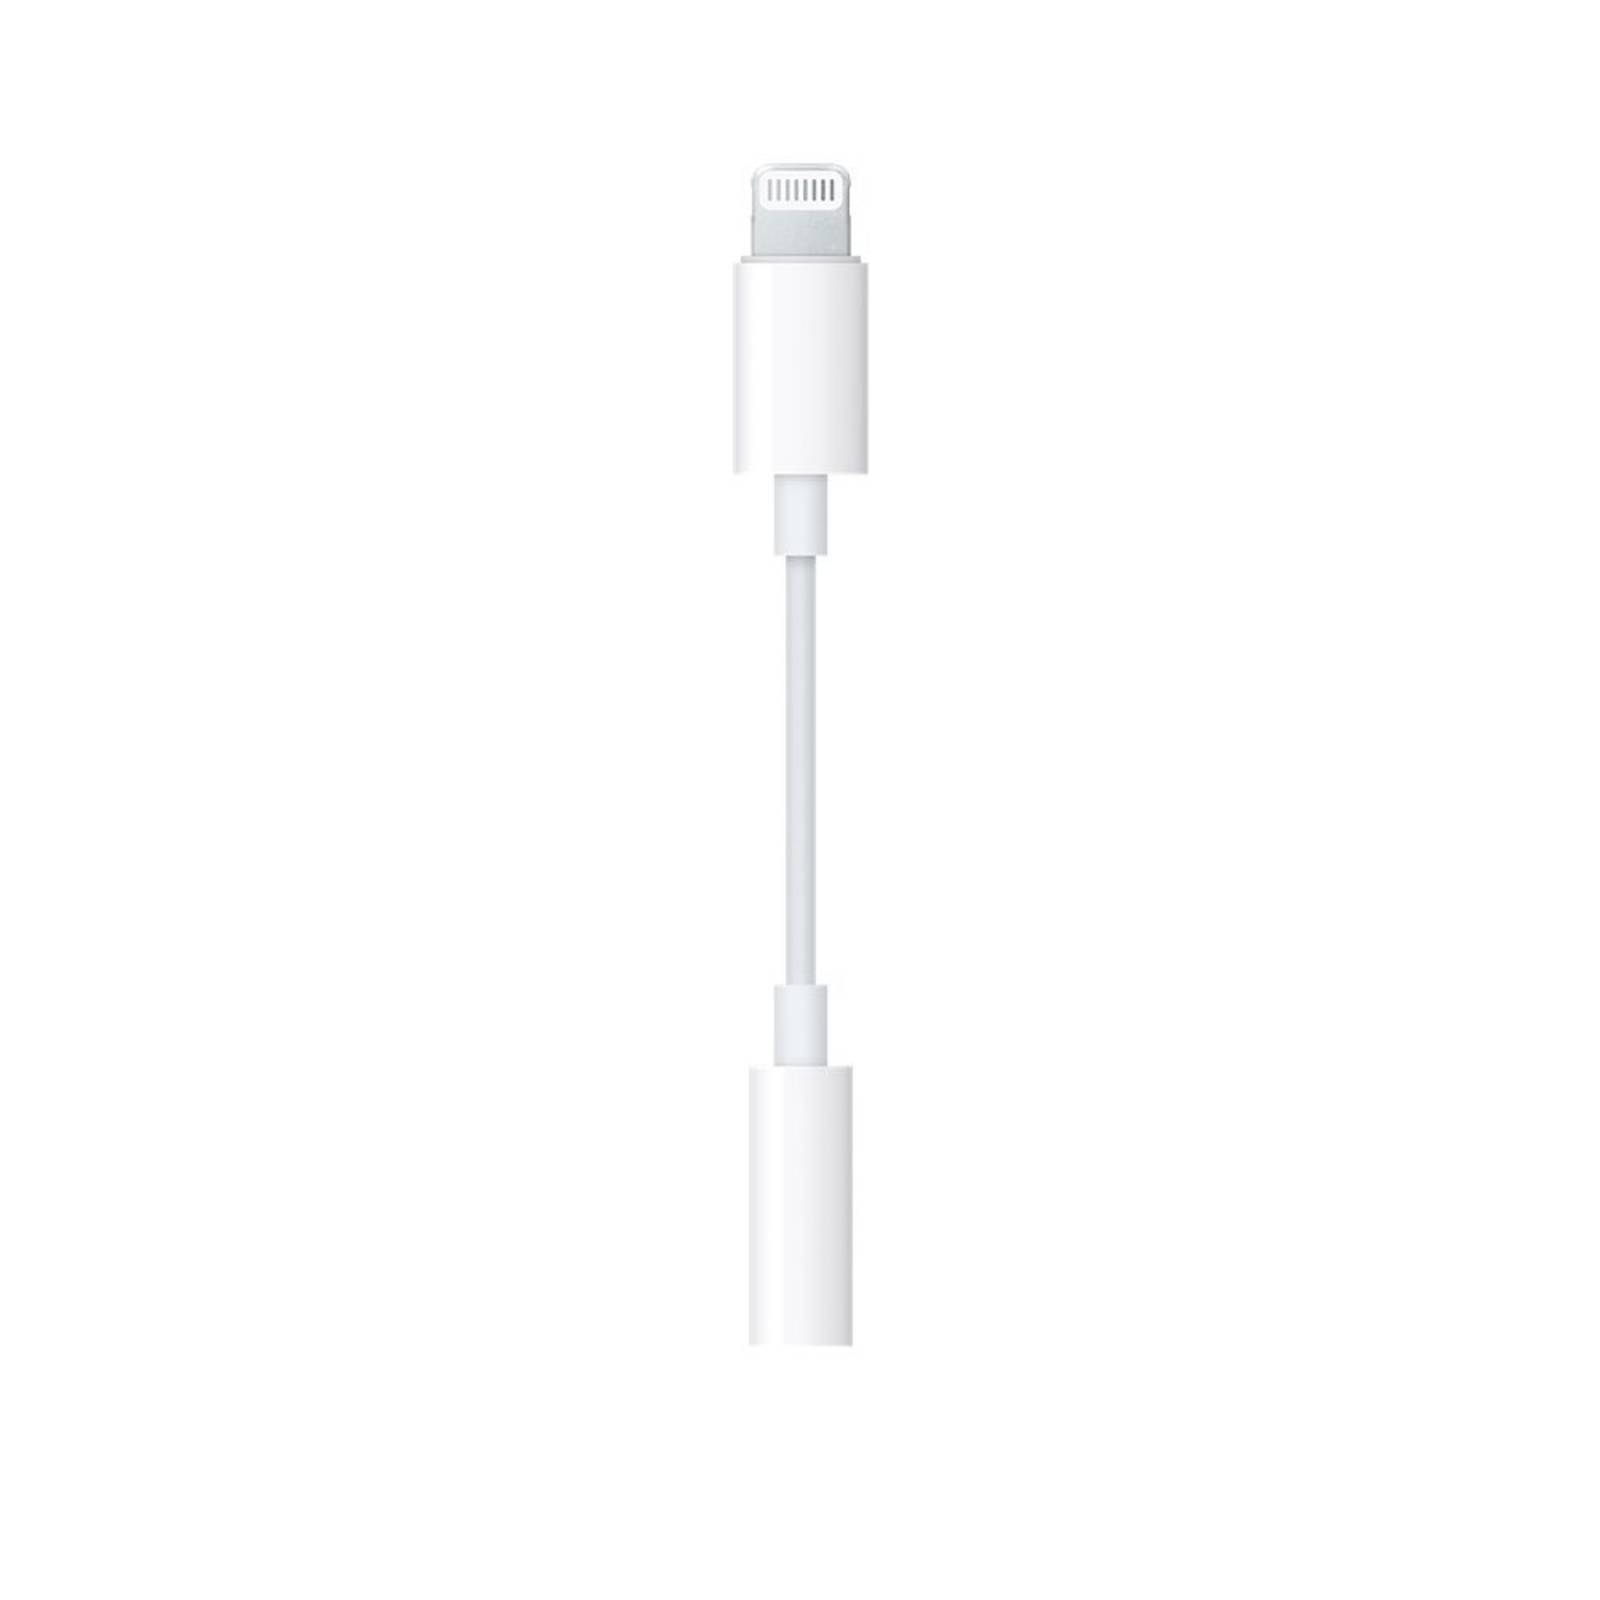 Genuine Apple Lightning To 3.5mm Headphone Jack Adapter For iPhone 7/8/XS/XS Max